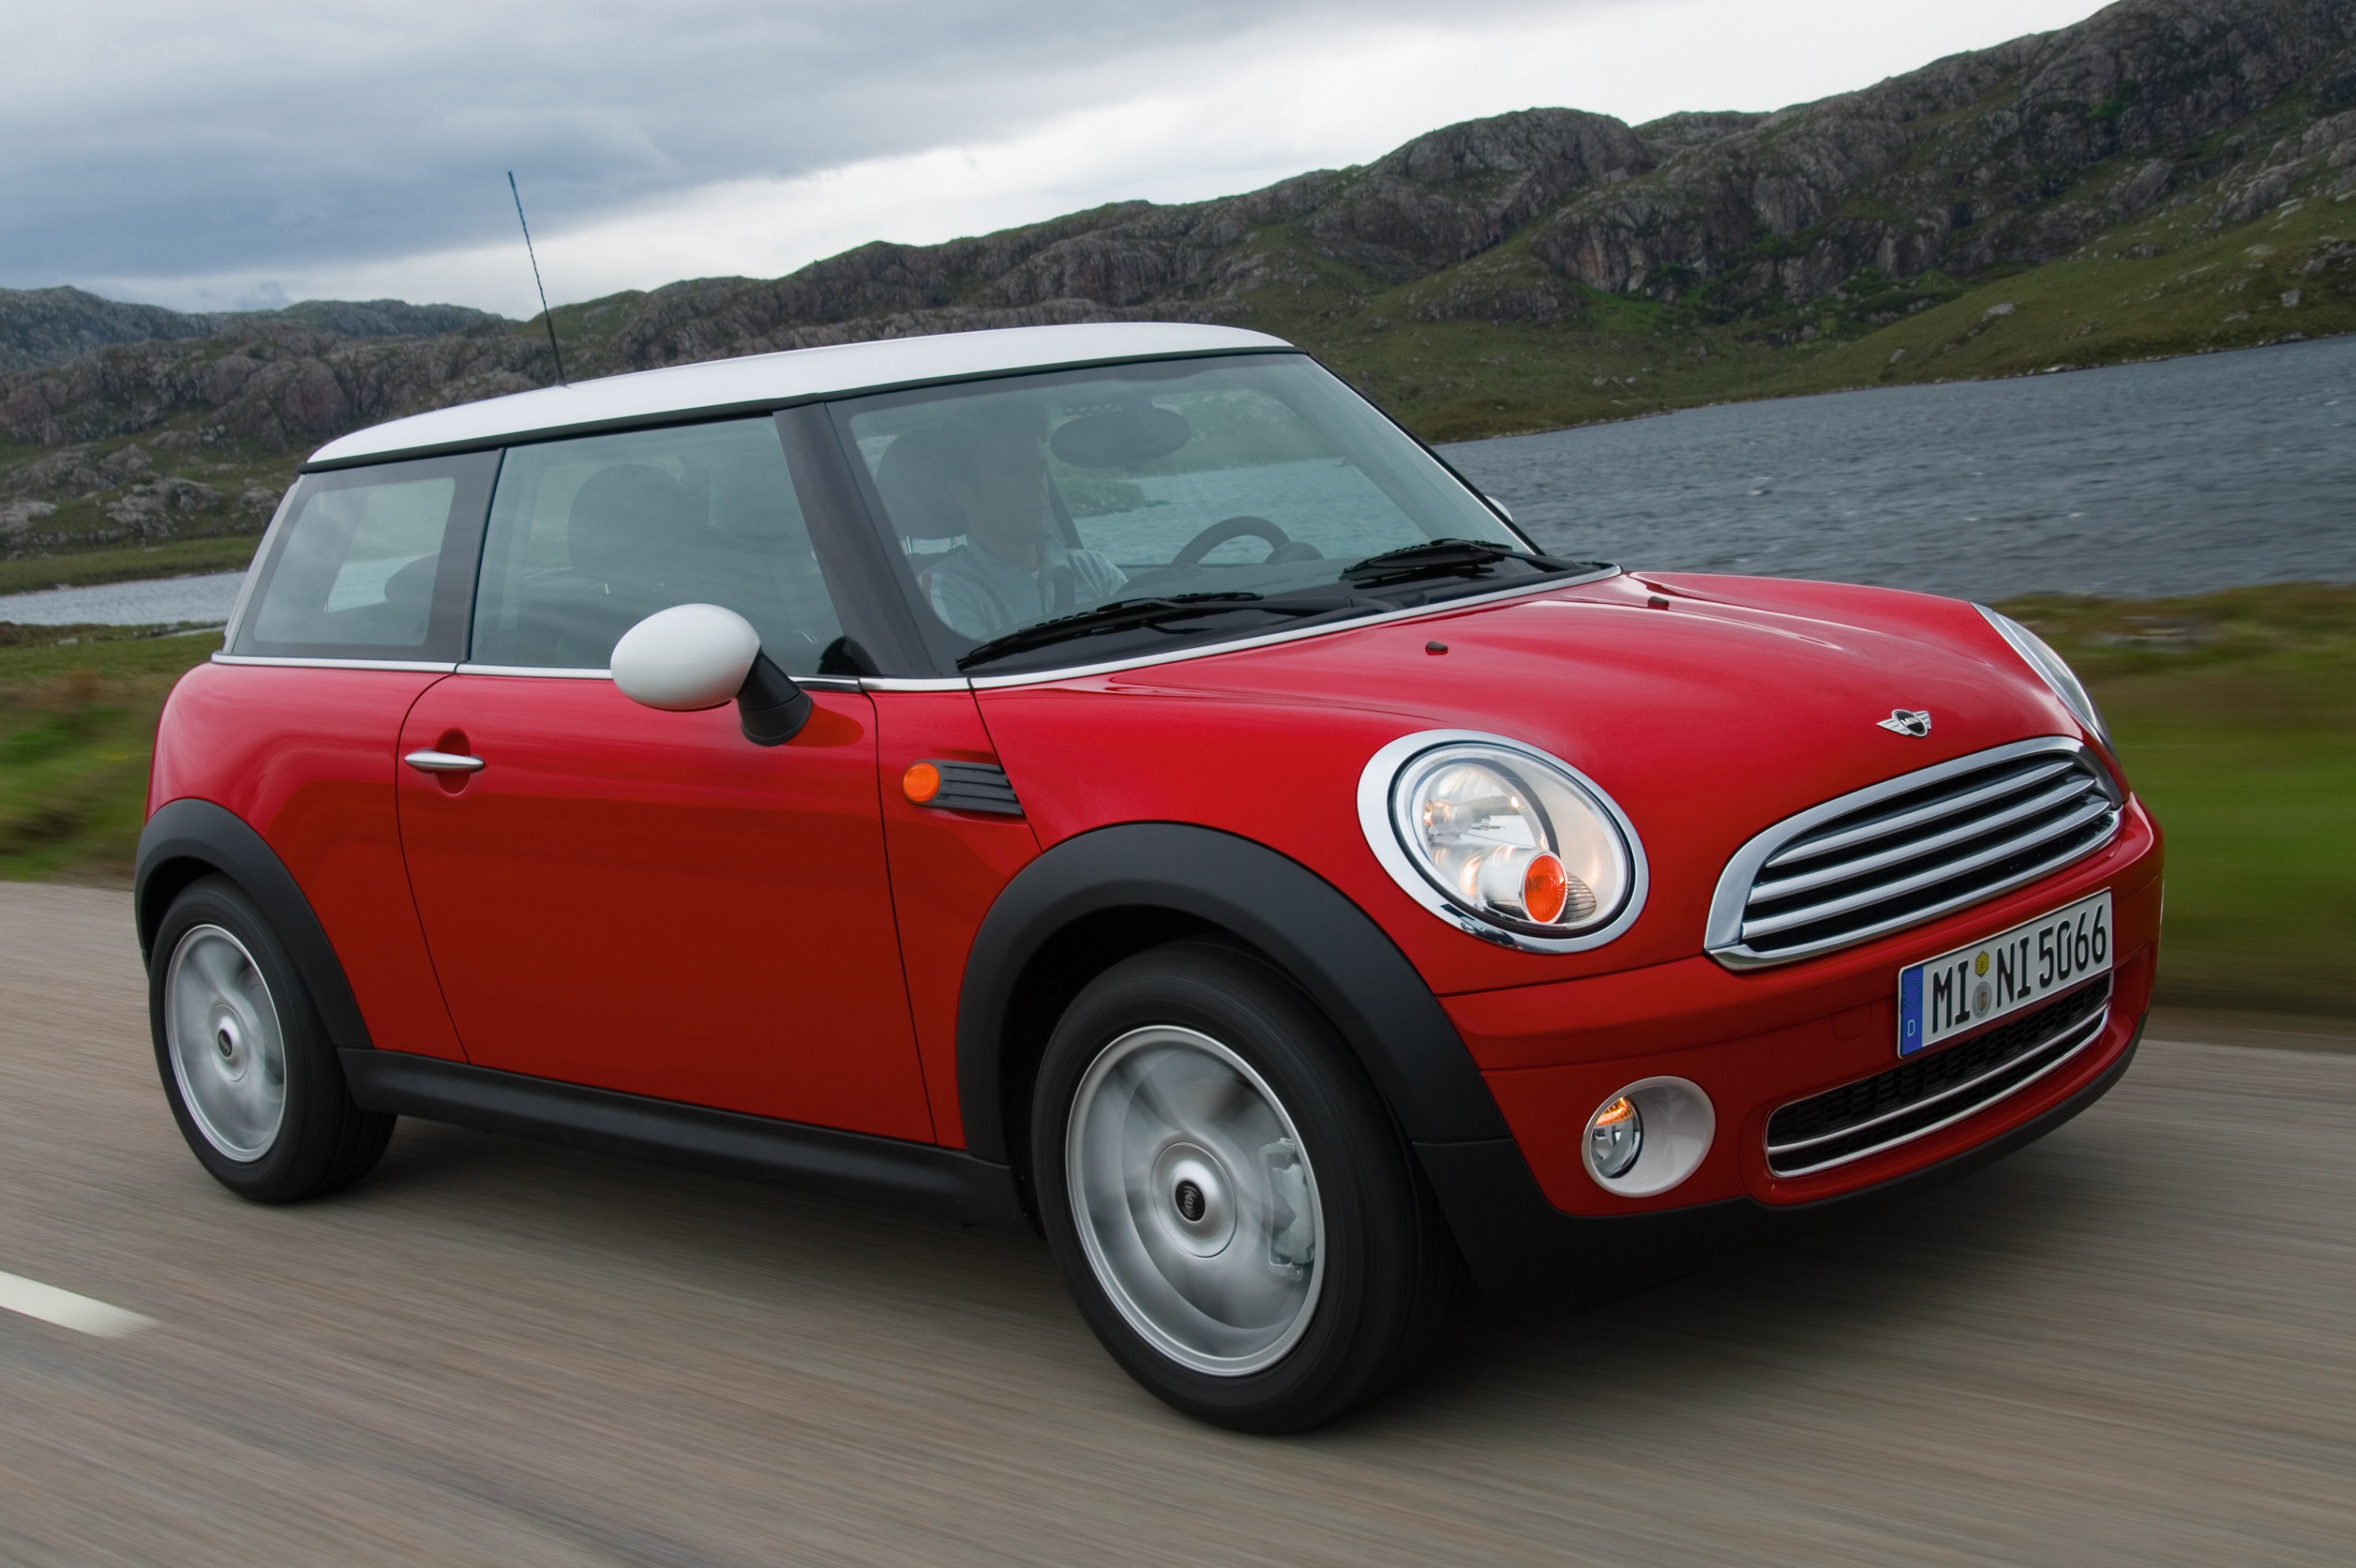 A red 2007 R56 Mini Cooper driving down a road next to a hillside lake